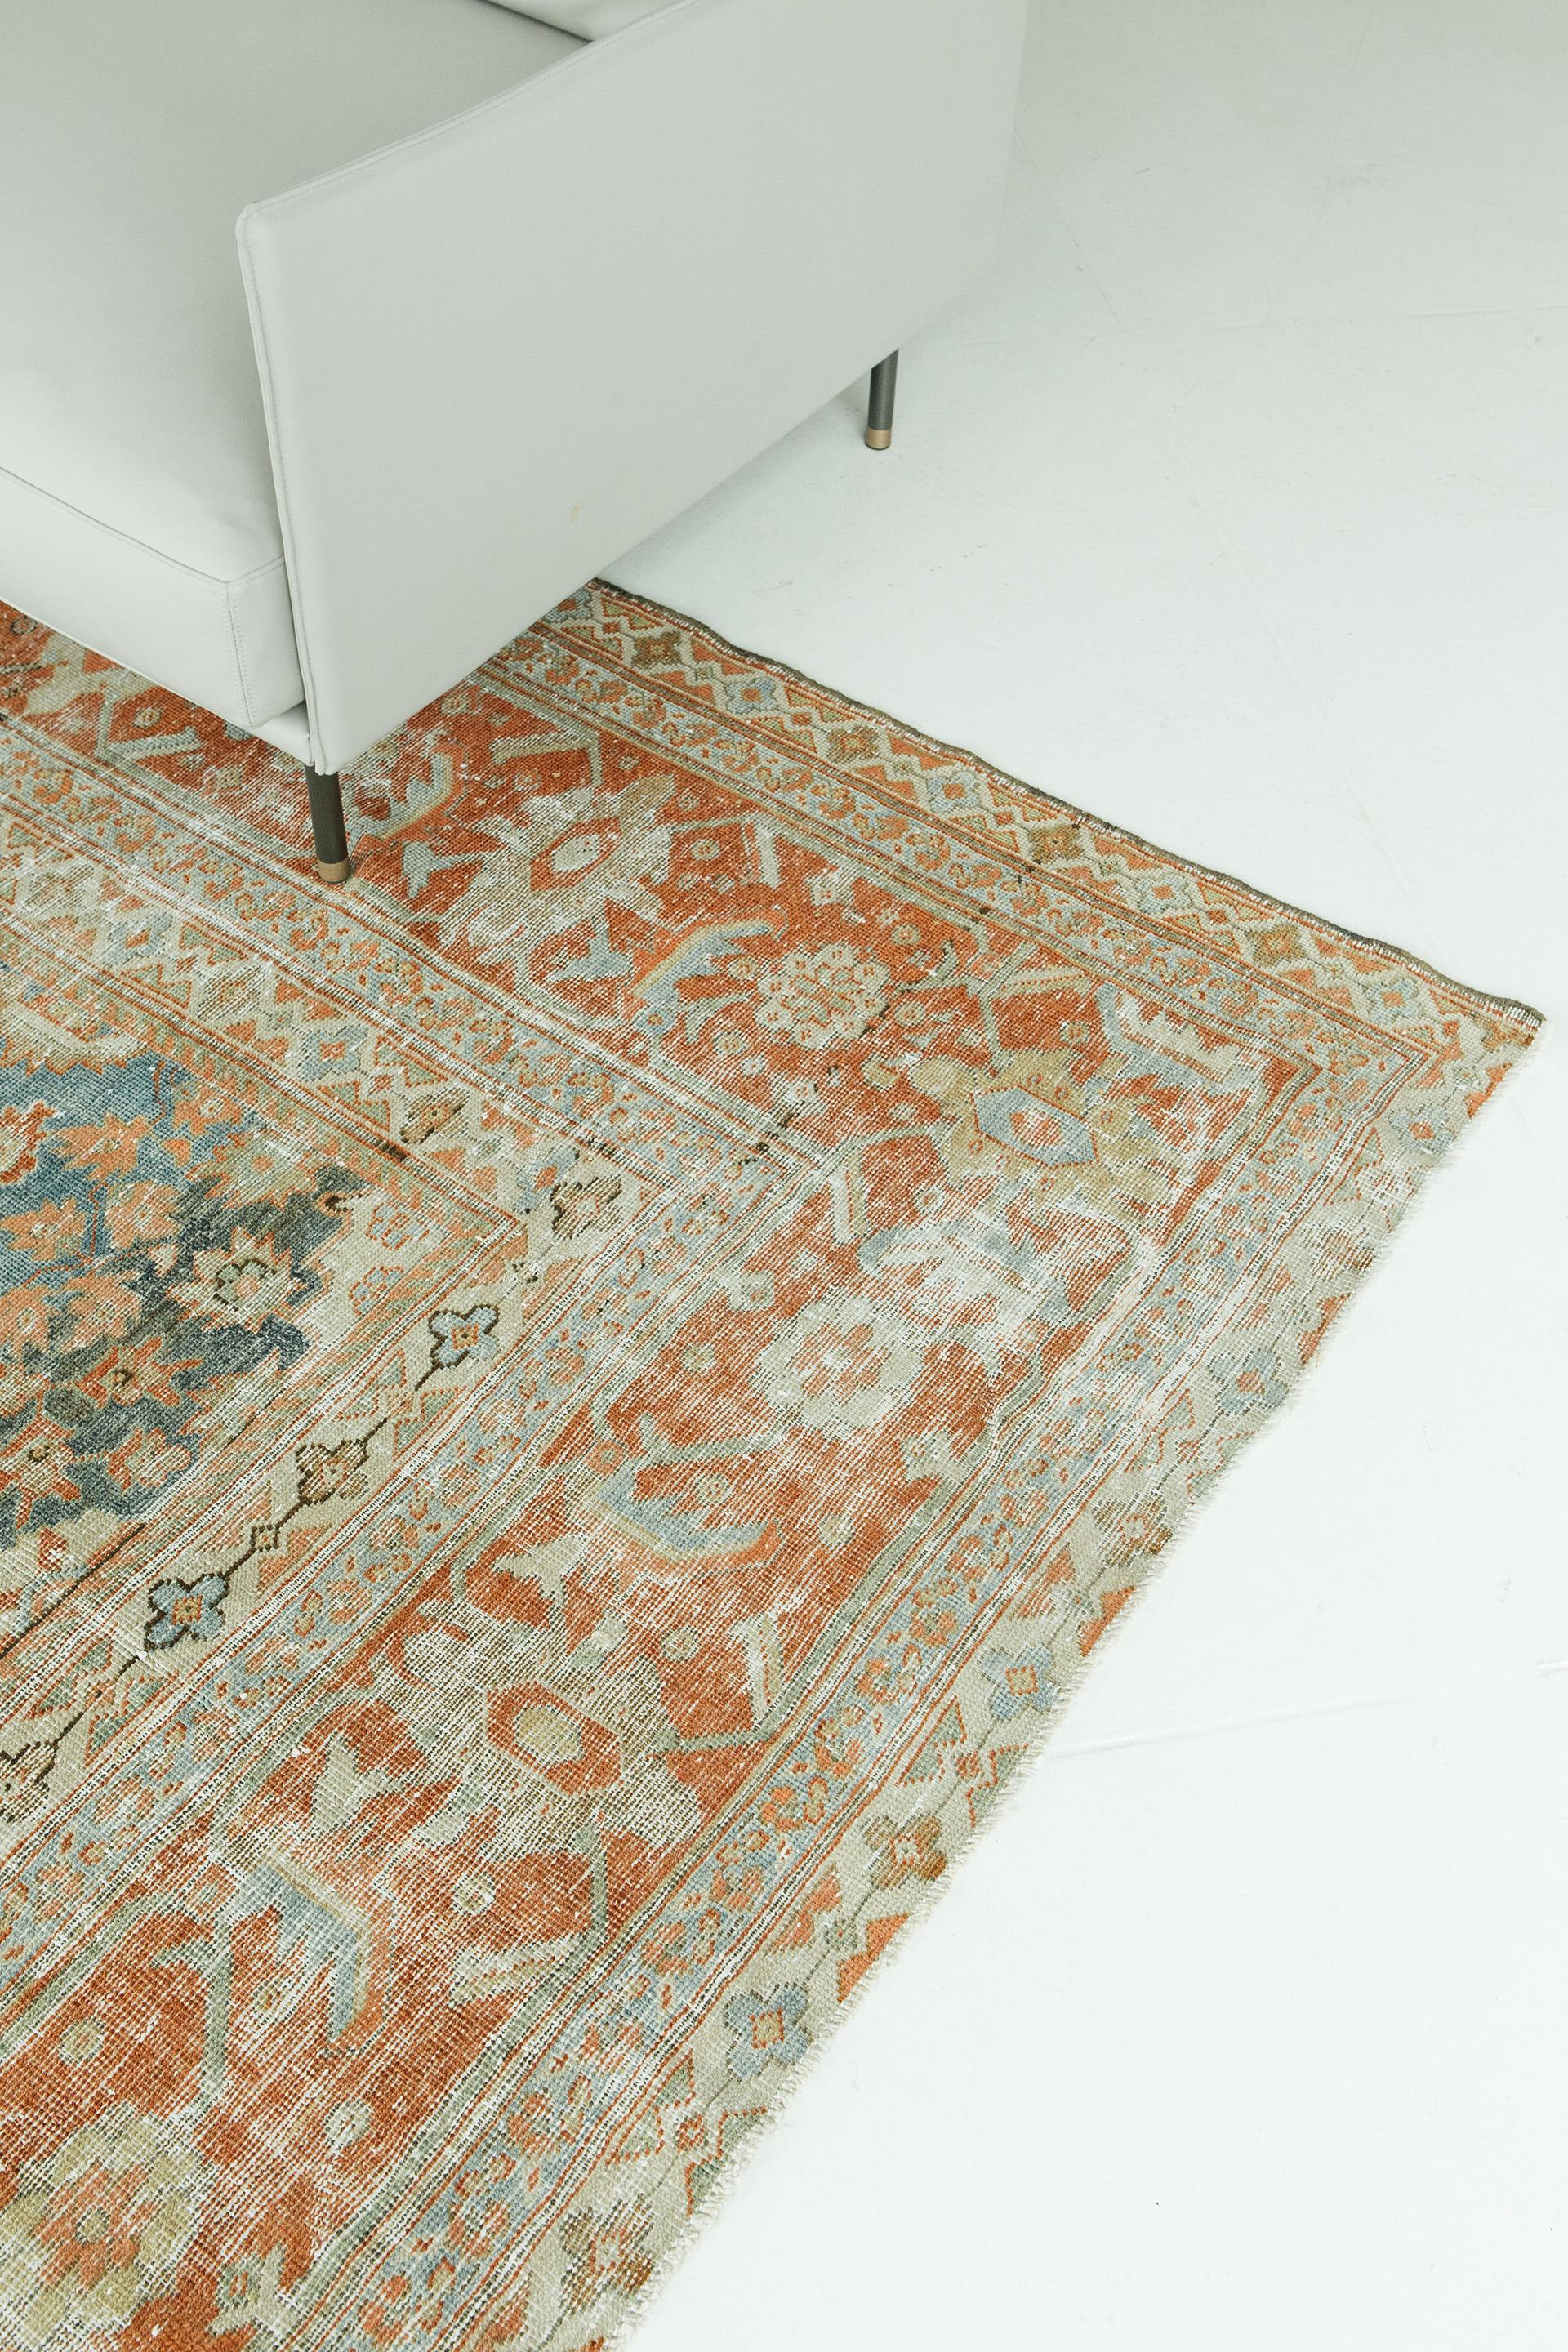 This Sultanabad rug features a warm color palette. And although Sultanabad rugs were not always considered purely Persian, rugs such as this one have become classics in their own right. Carpets inspired by the designs of Sultanabad are still